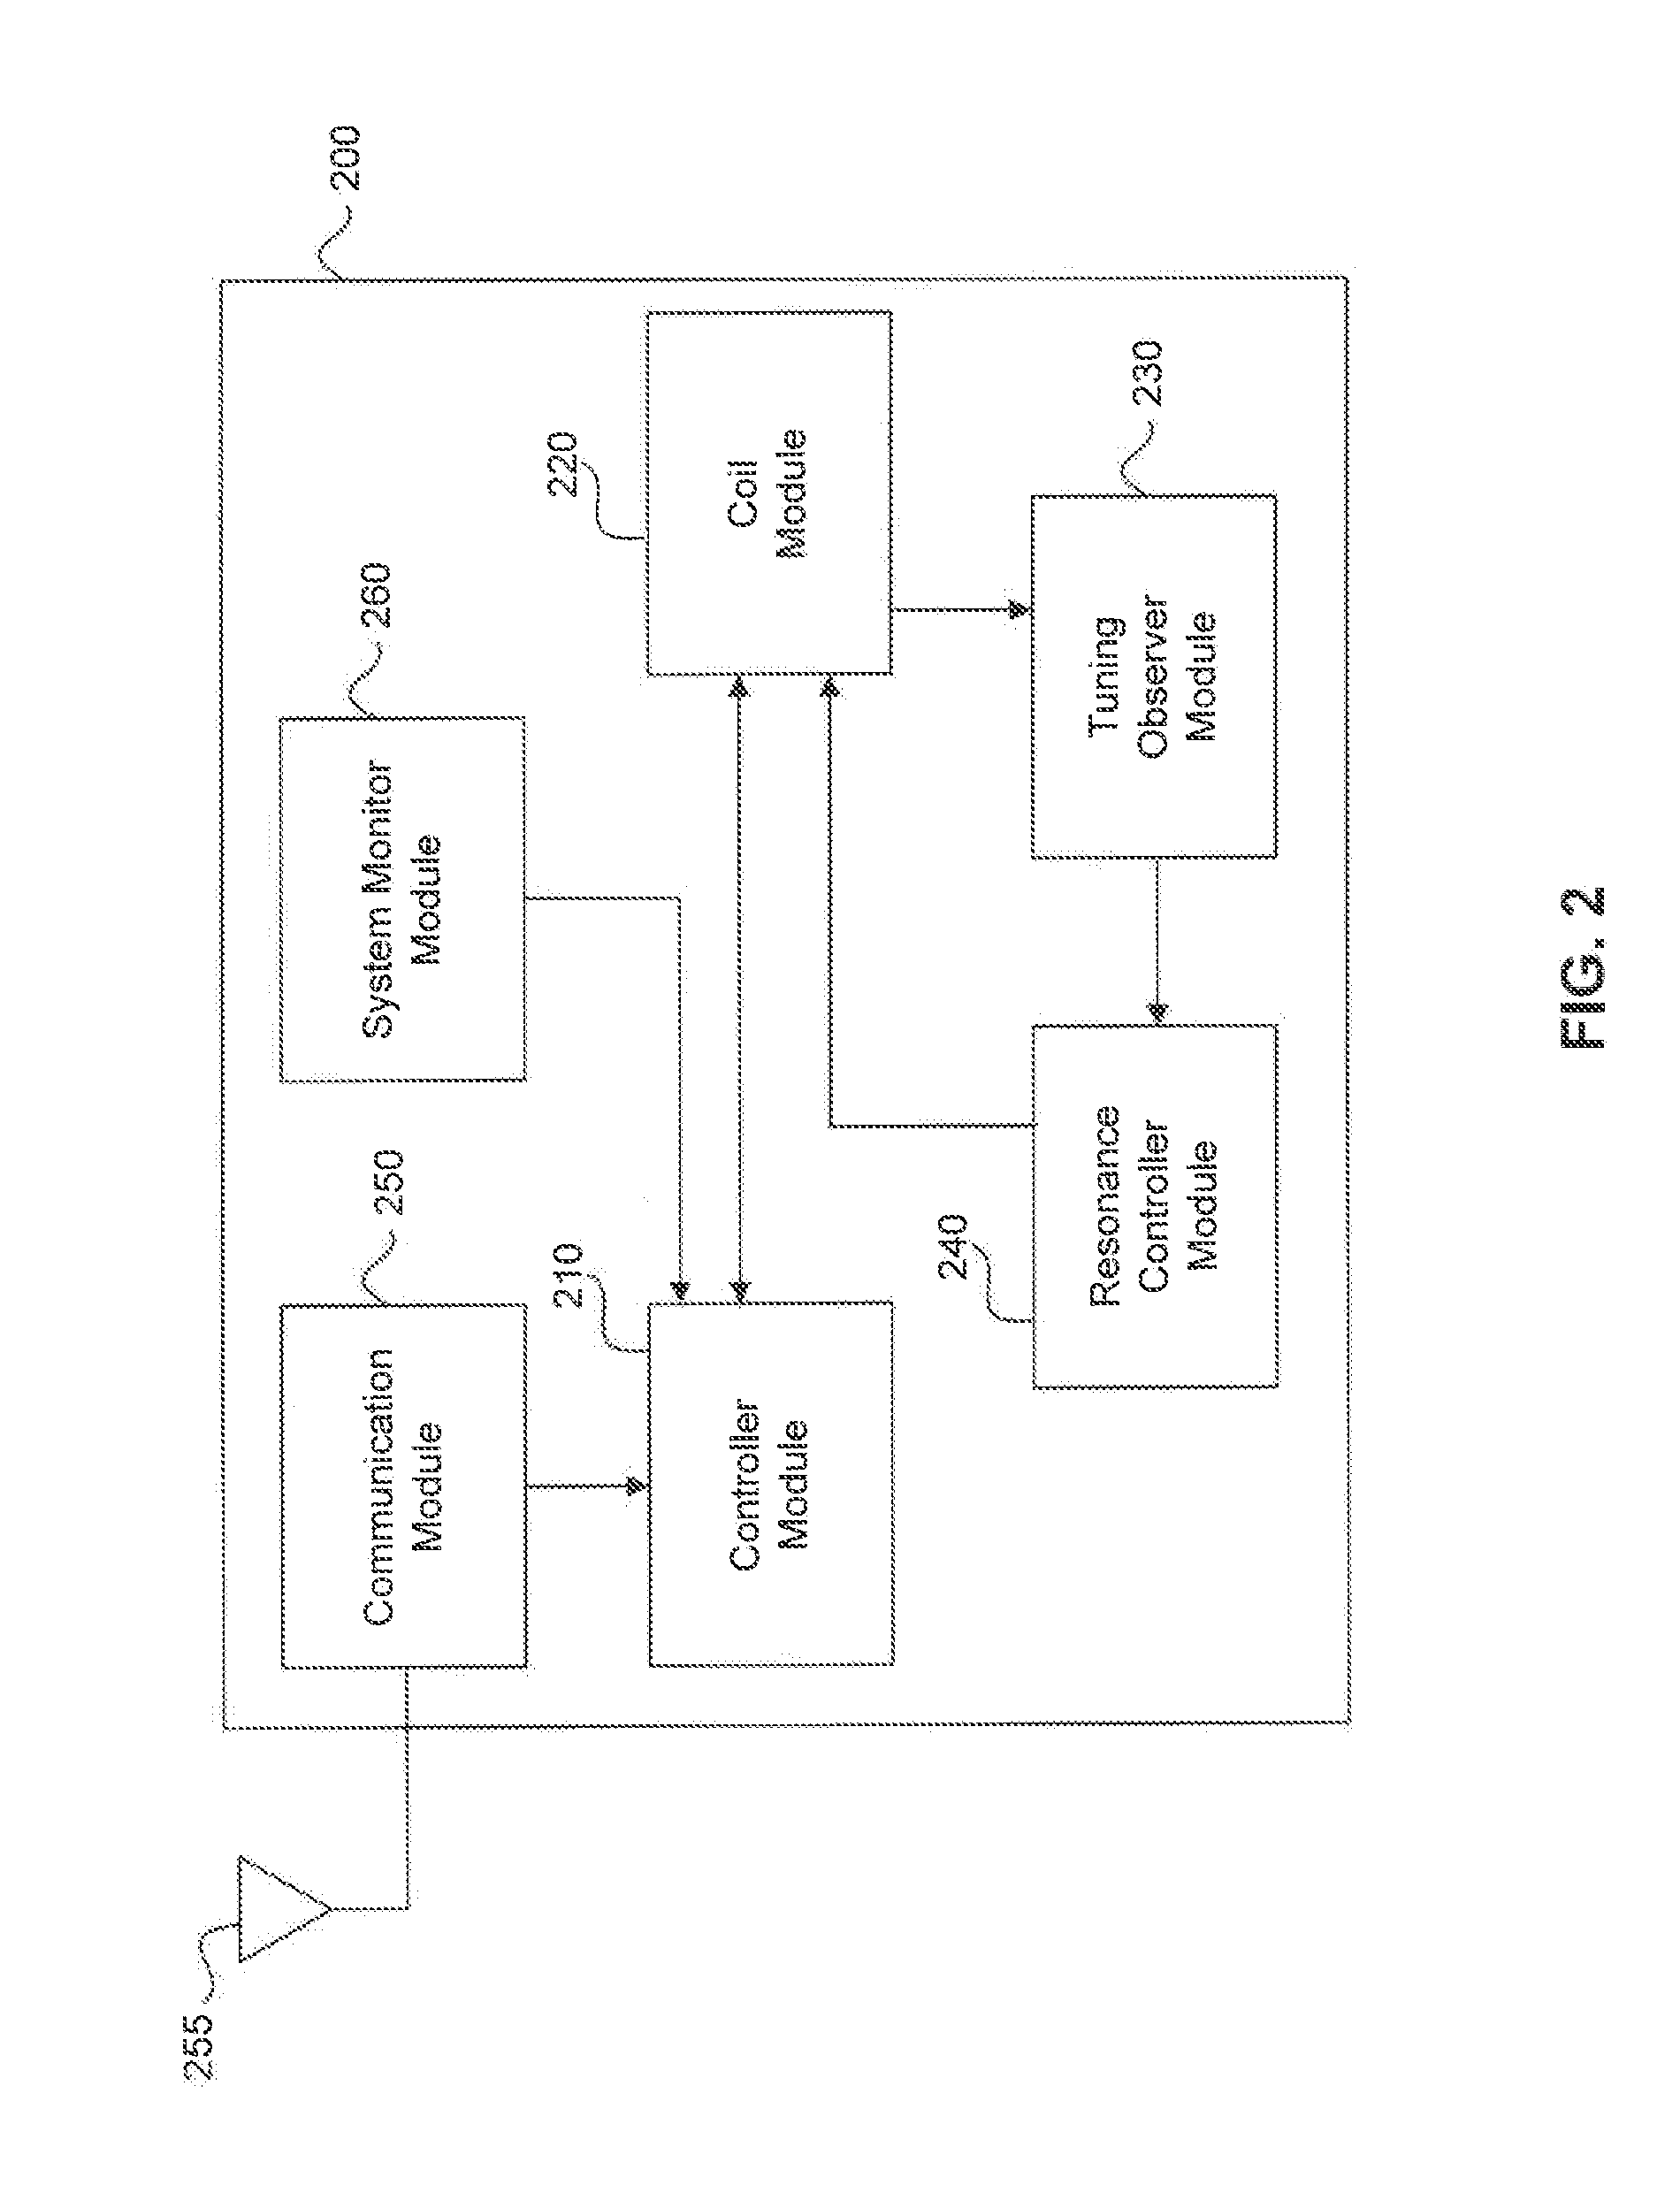 Method and System for Wireless Power Transfer Calibration